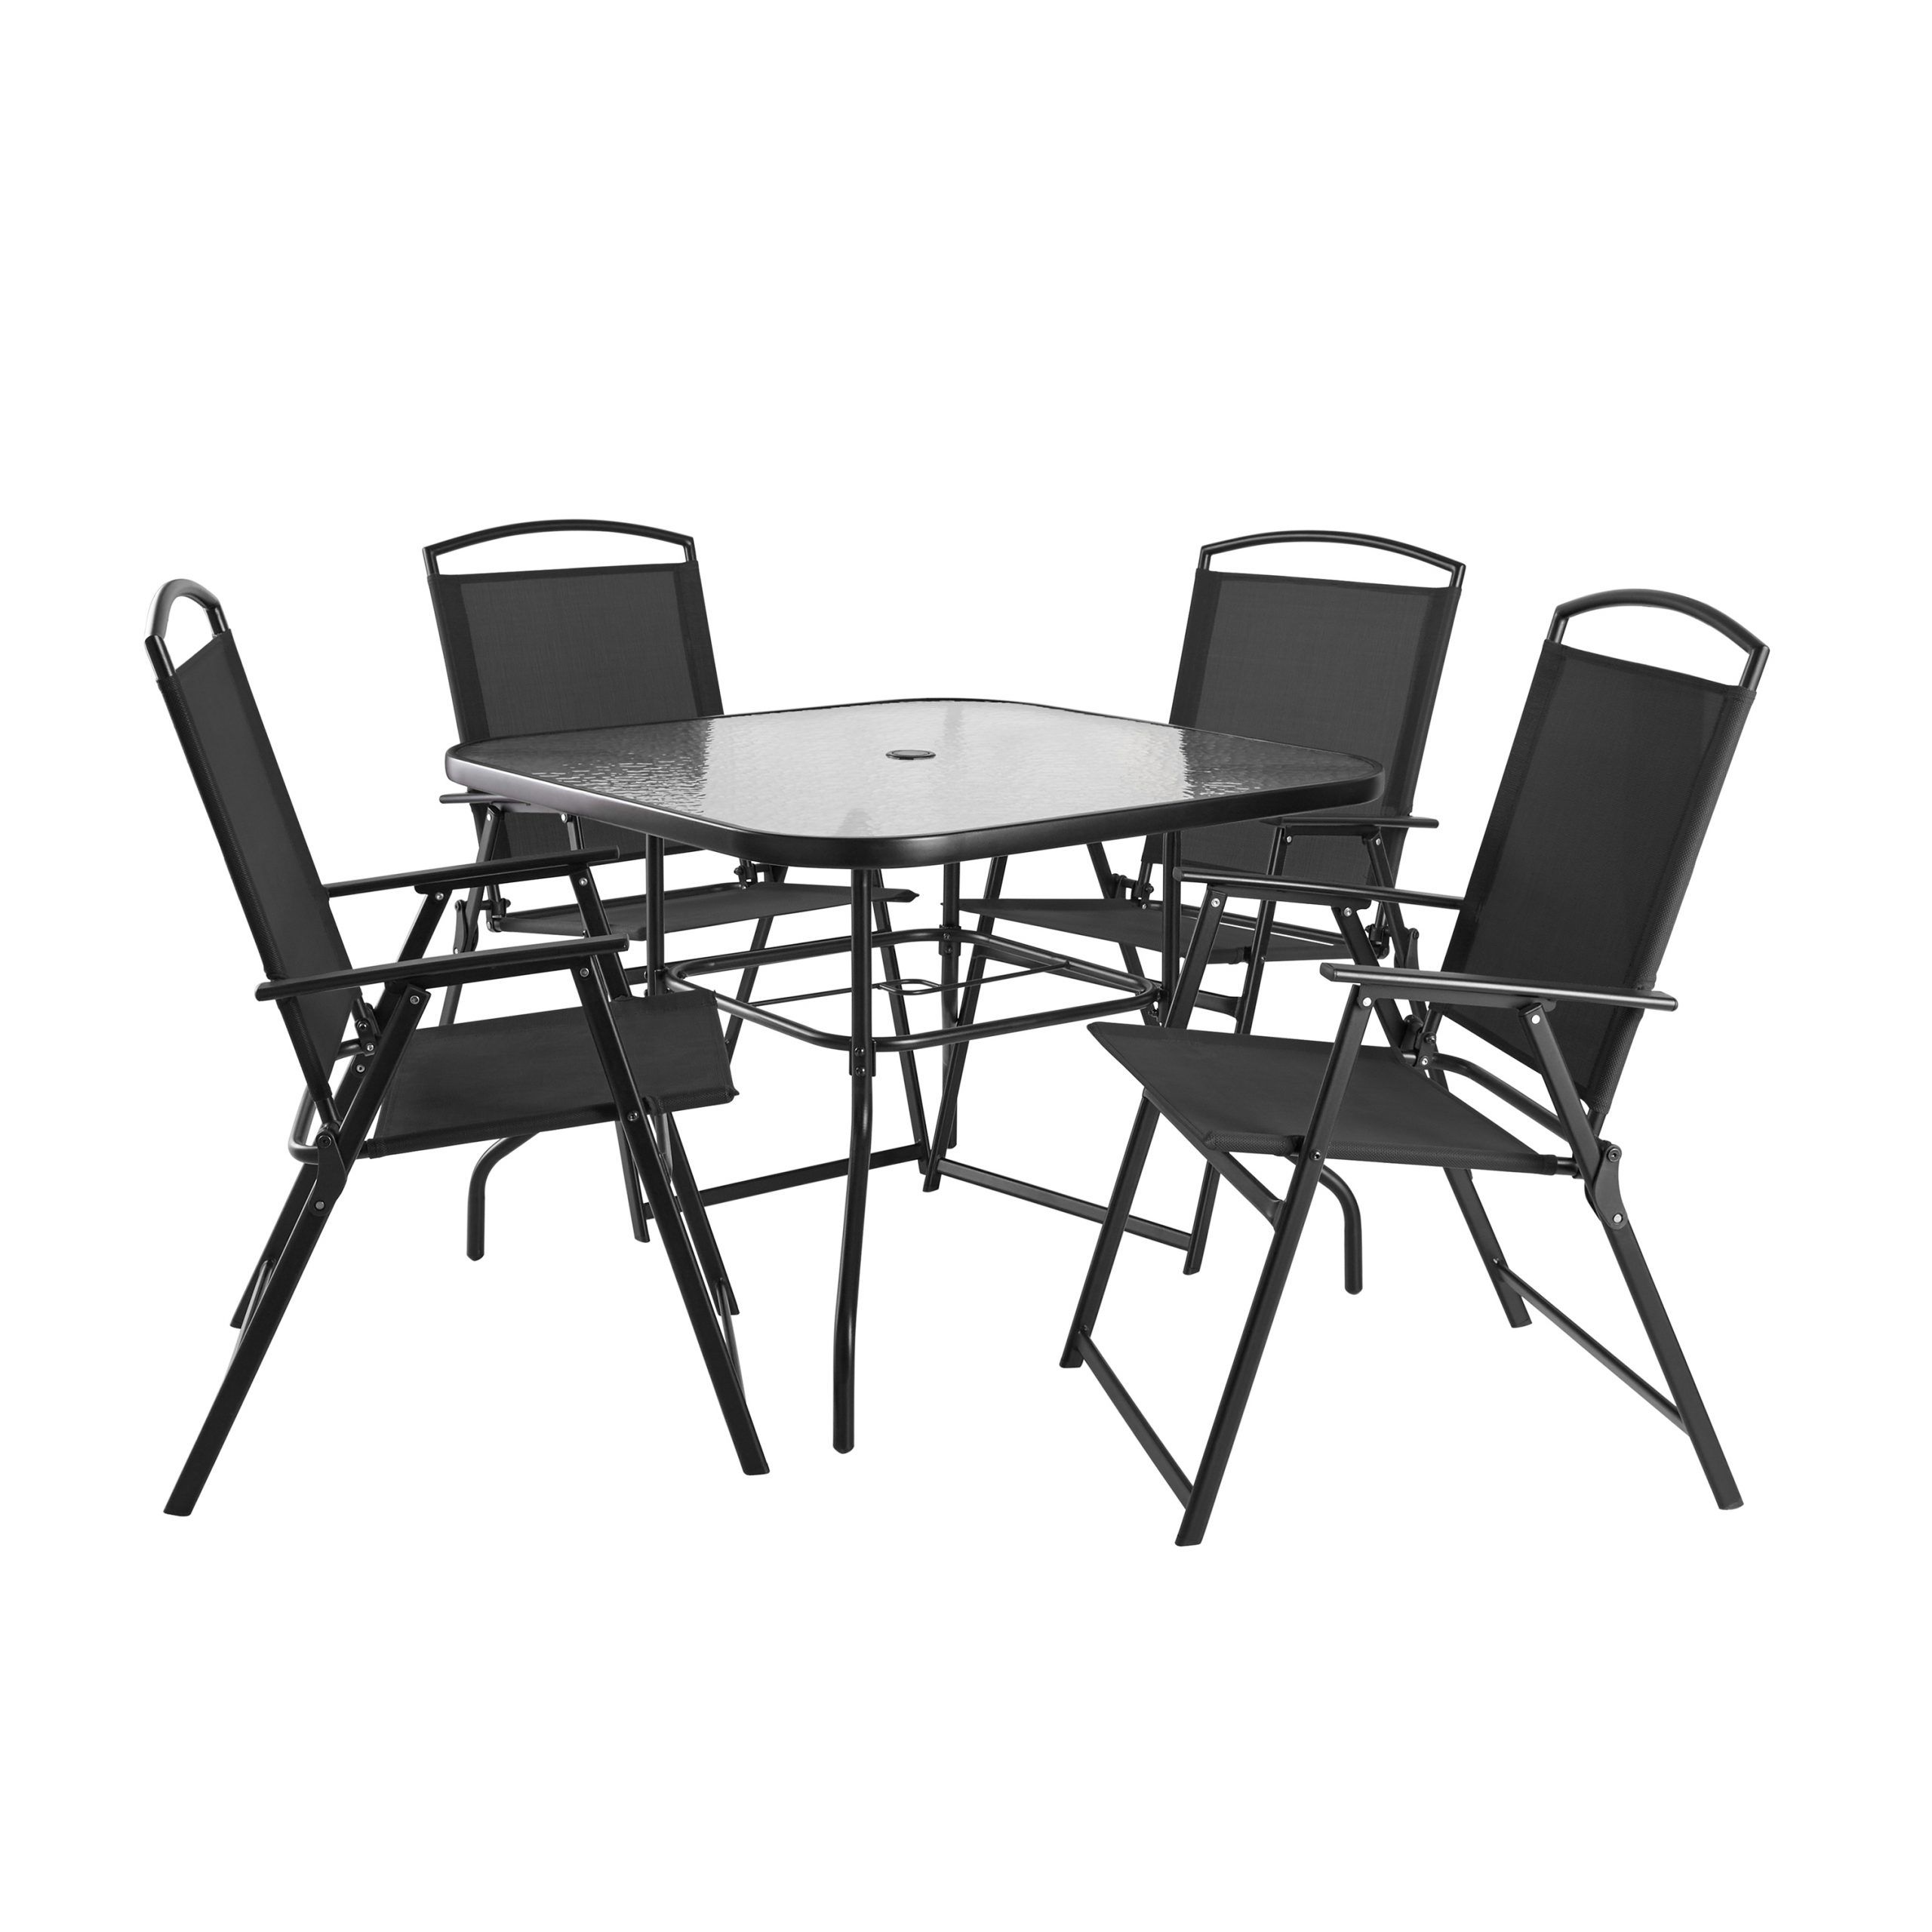 5 Piece Patio Dining Set With Regard To Preferred Mainstays Albany Lane Outdoor Patio 5 Piece Dining Set, Black Frame And (View 12 of 15)